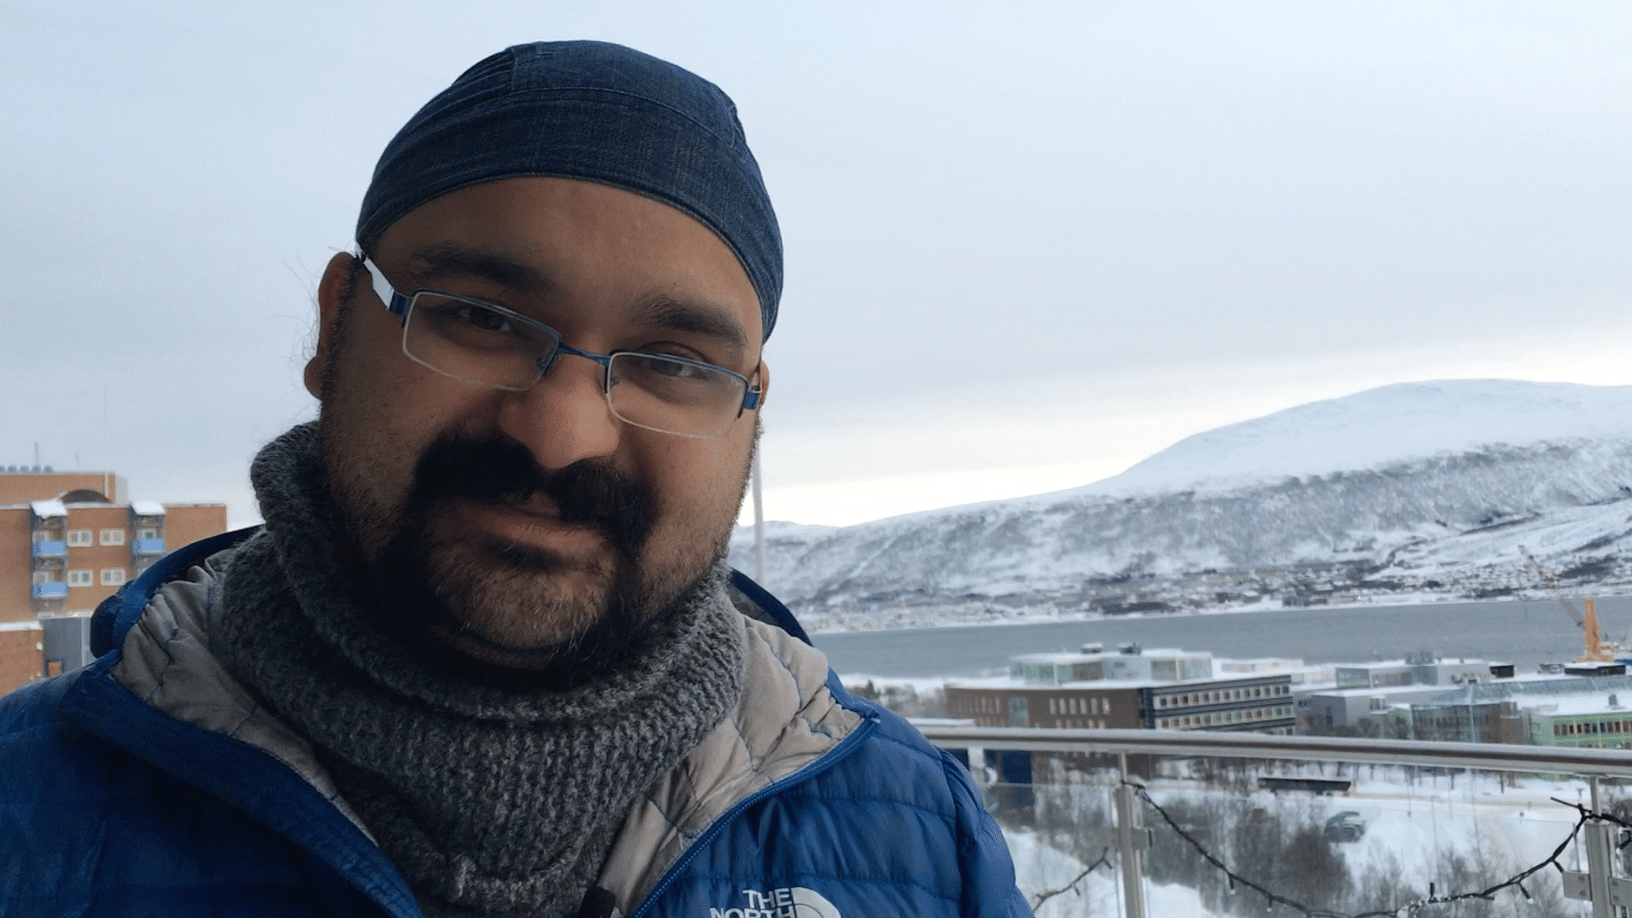 Balpreet Singh has been working in Norway for about a decade. (Photo: Manon Verchot)